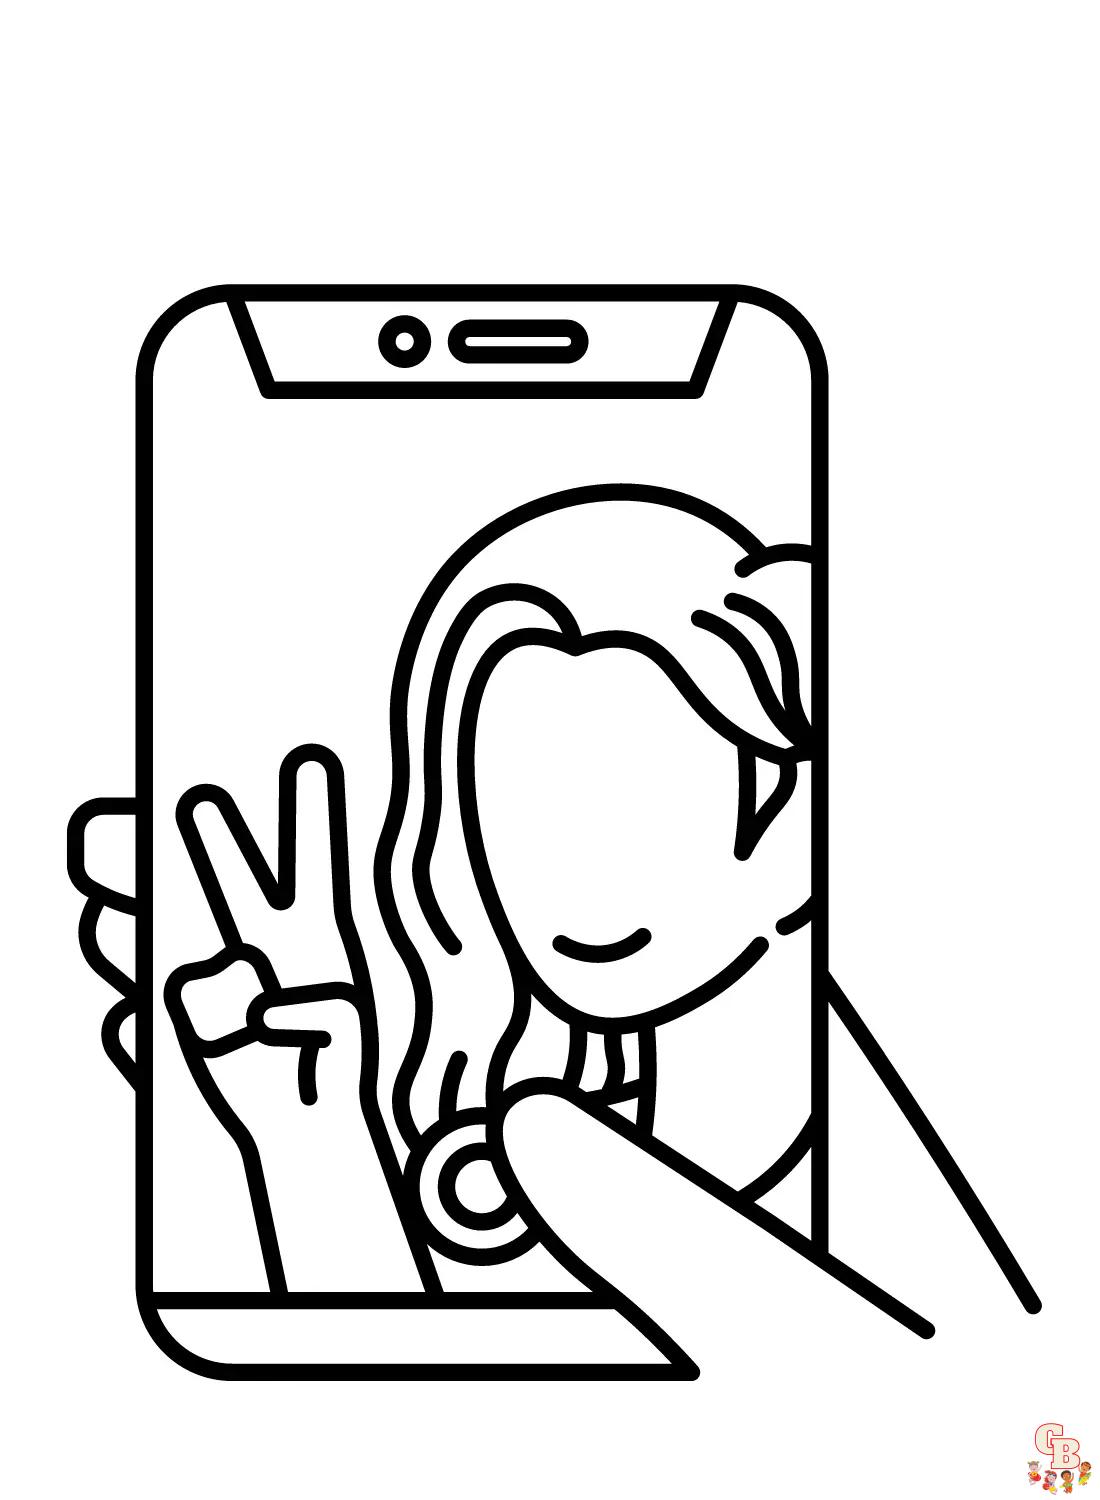 Phone Coloring Pages - Free Printable Sheets for Kids | GBcoloring